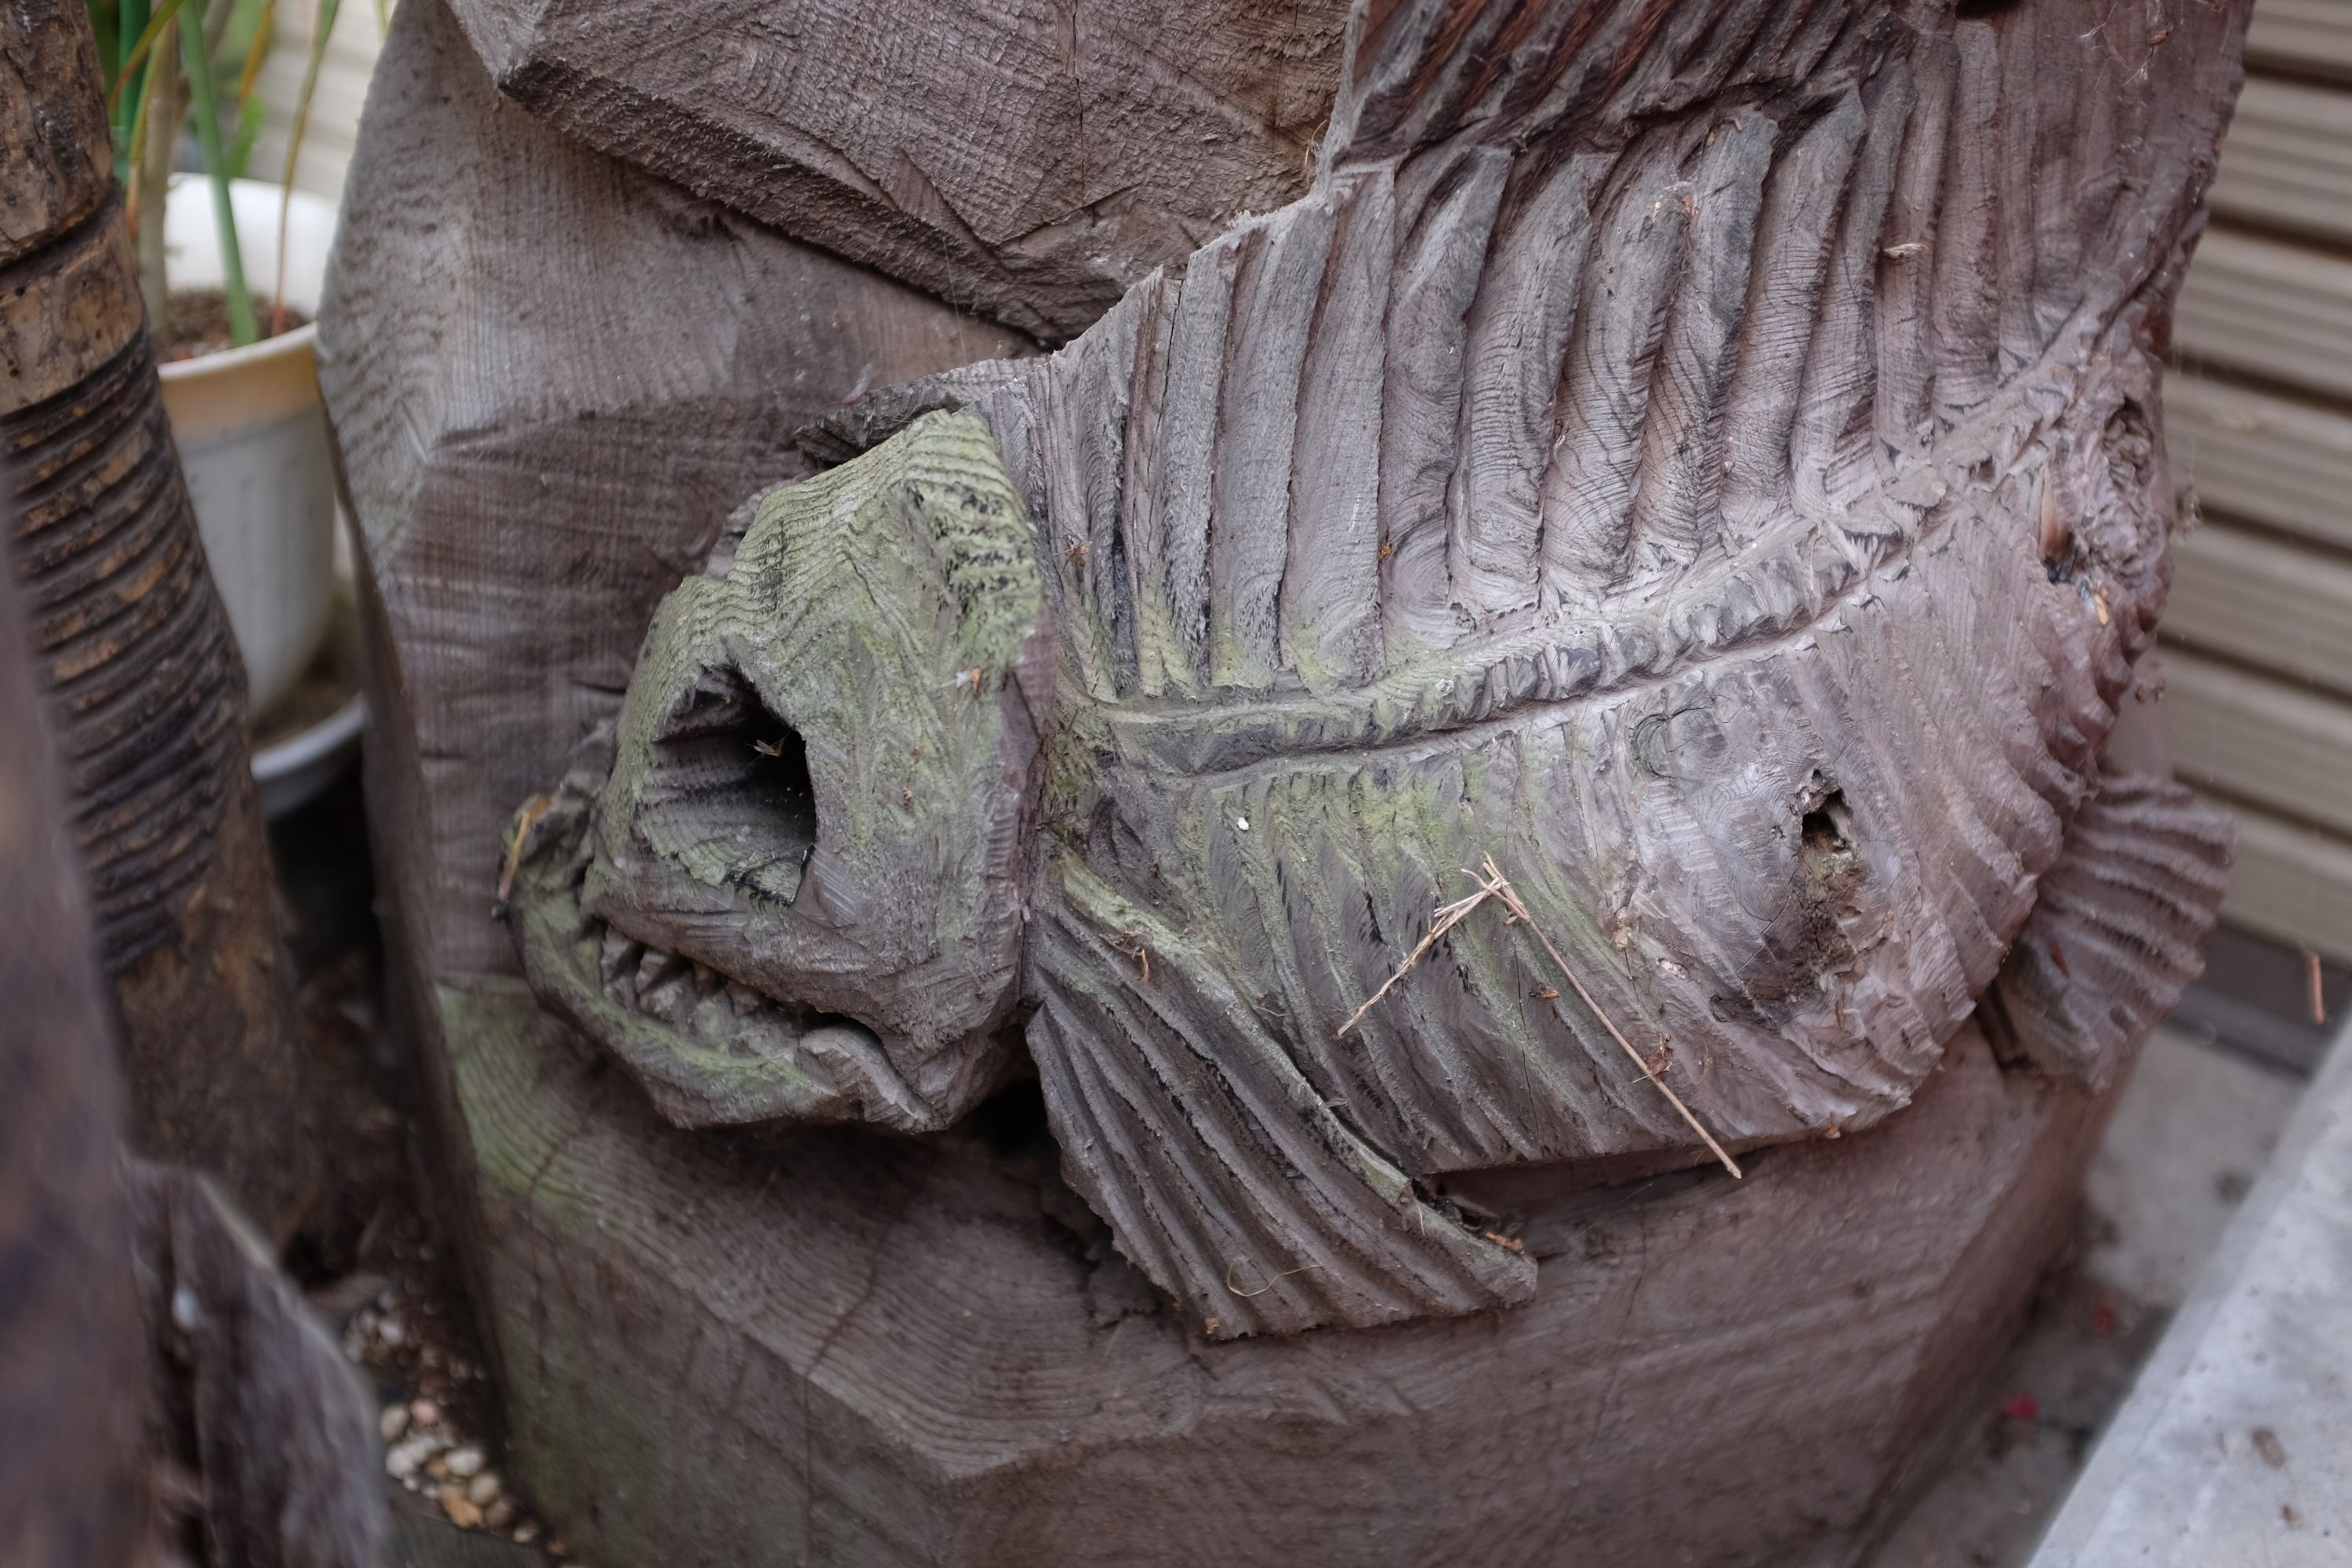 Detail of the statue showing a fish skeleton, also carved in wood.